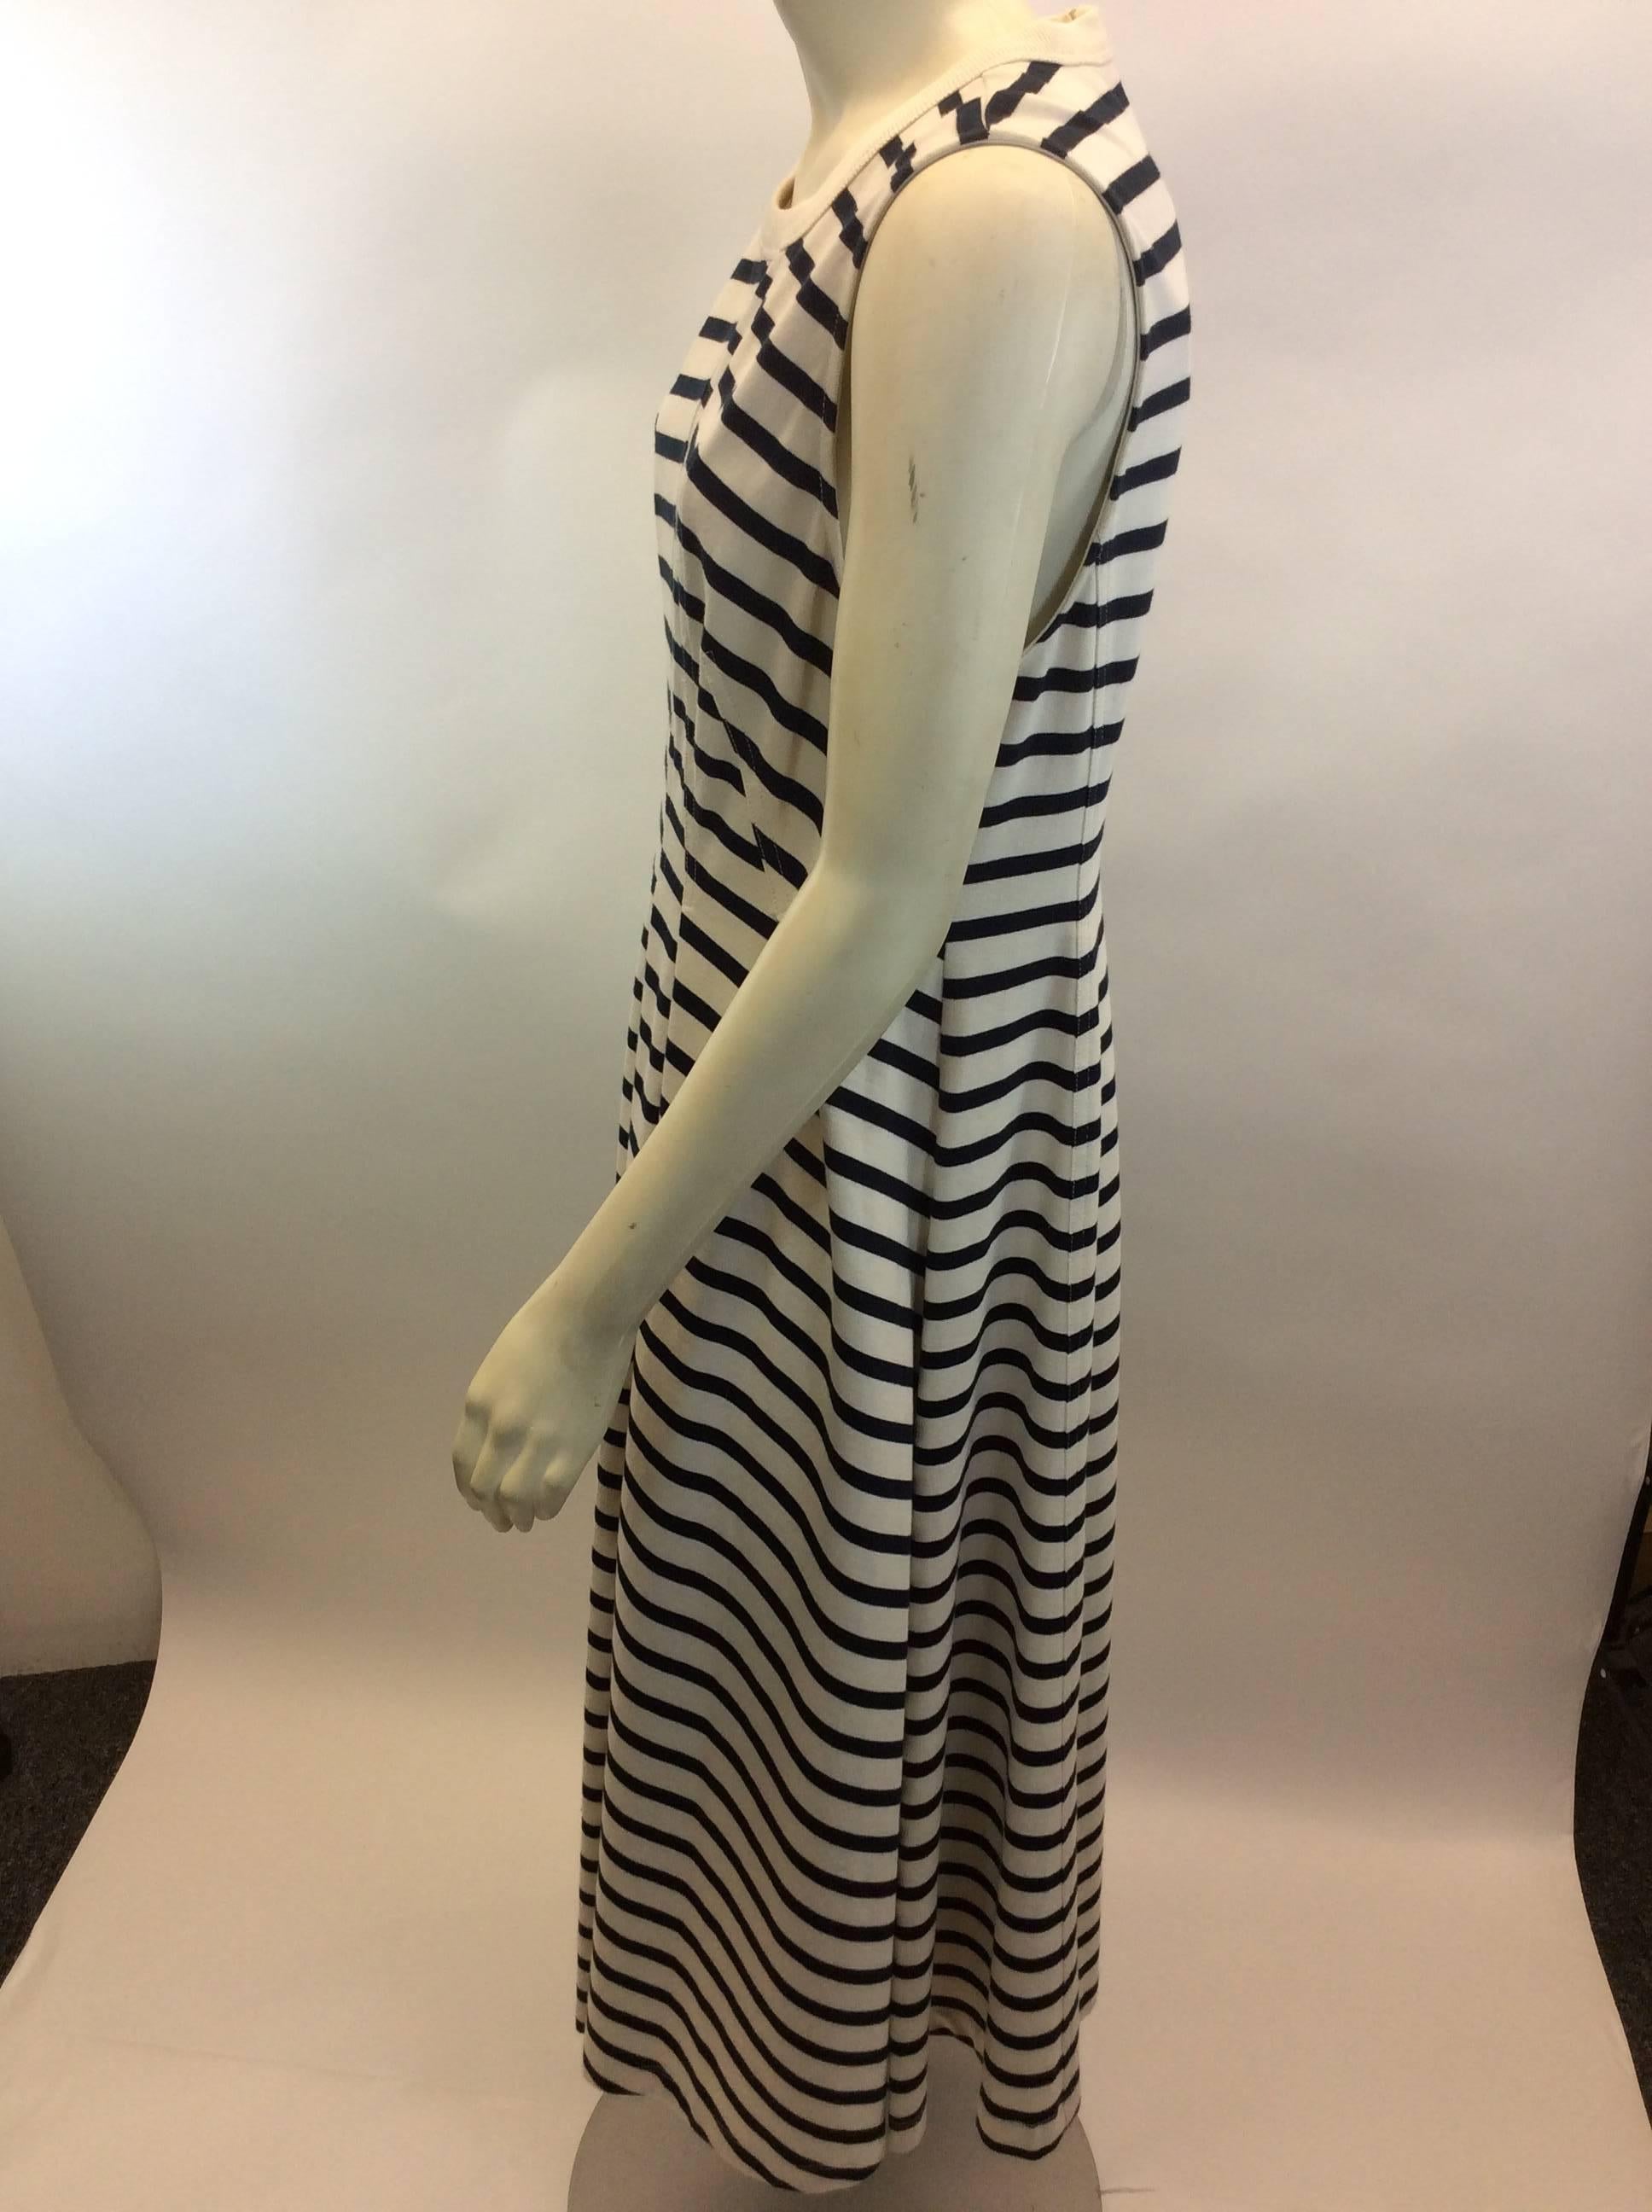 Alexander Wang Navy Blue and White Stripe Dress NWT
$199
100% Cotton
Made in China
Size Medium
Length 46.5